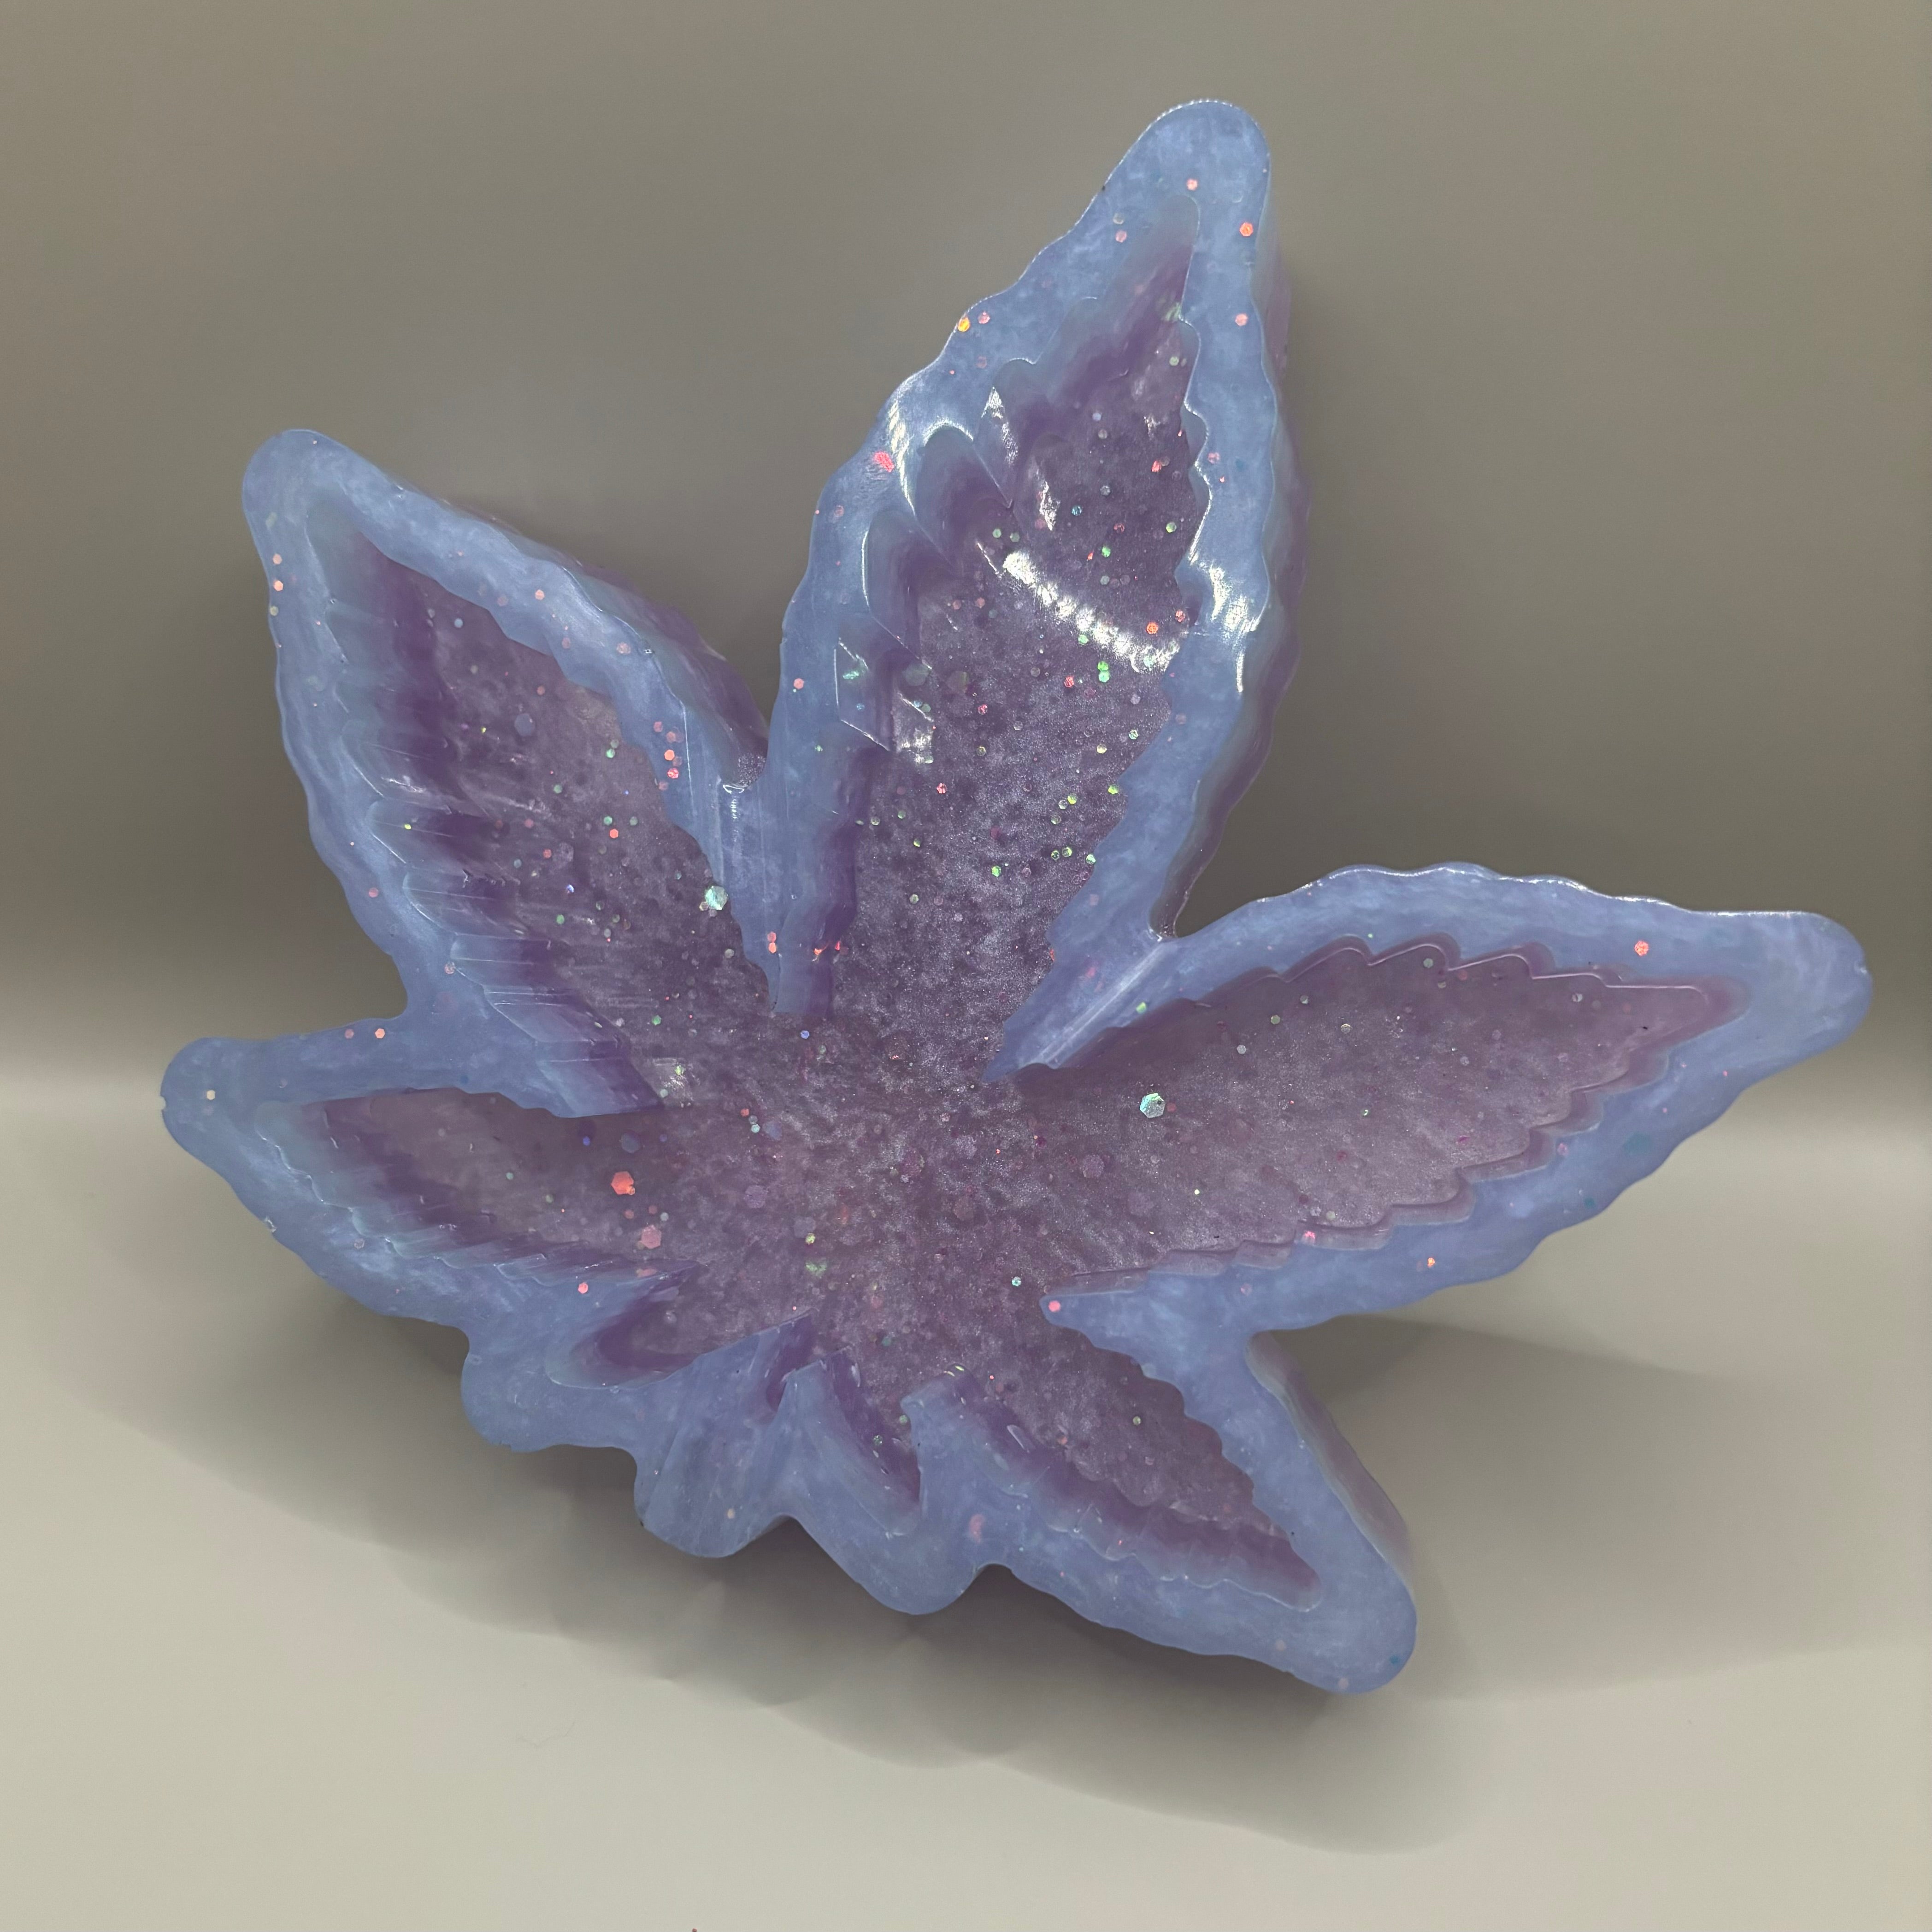 Weed Leaf Ashtray With Joint Holders